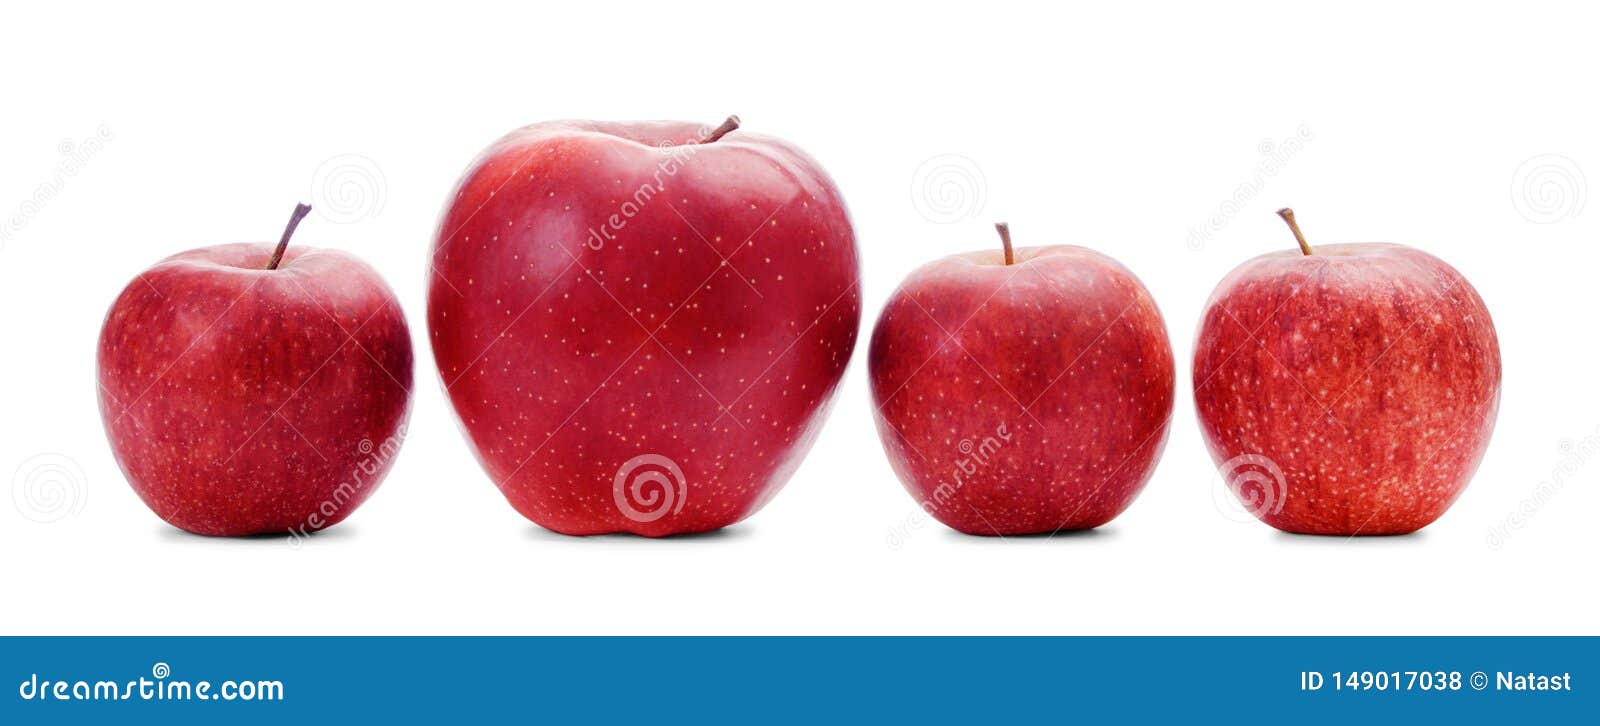 Background Small Apples Apples Can Be Stock Photo 470876657